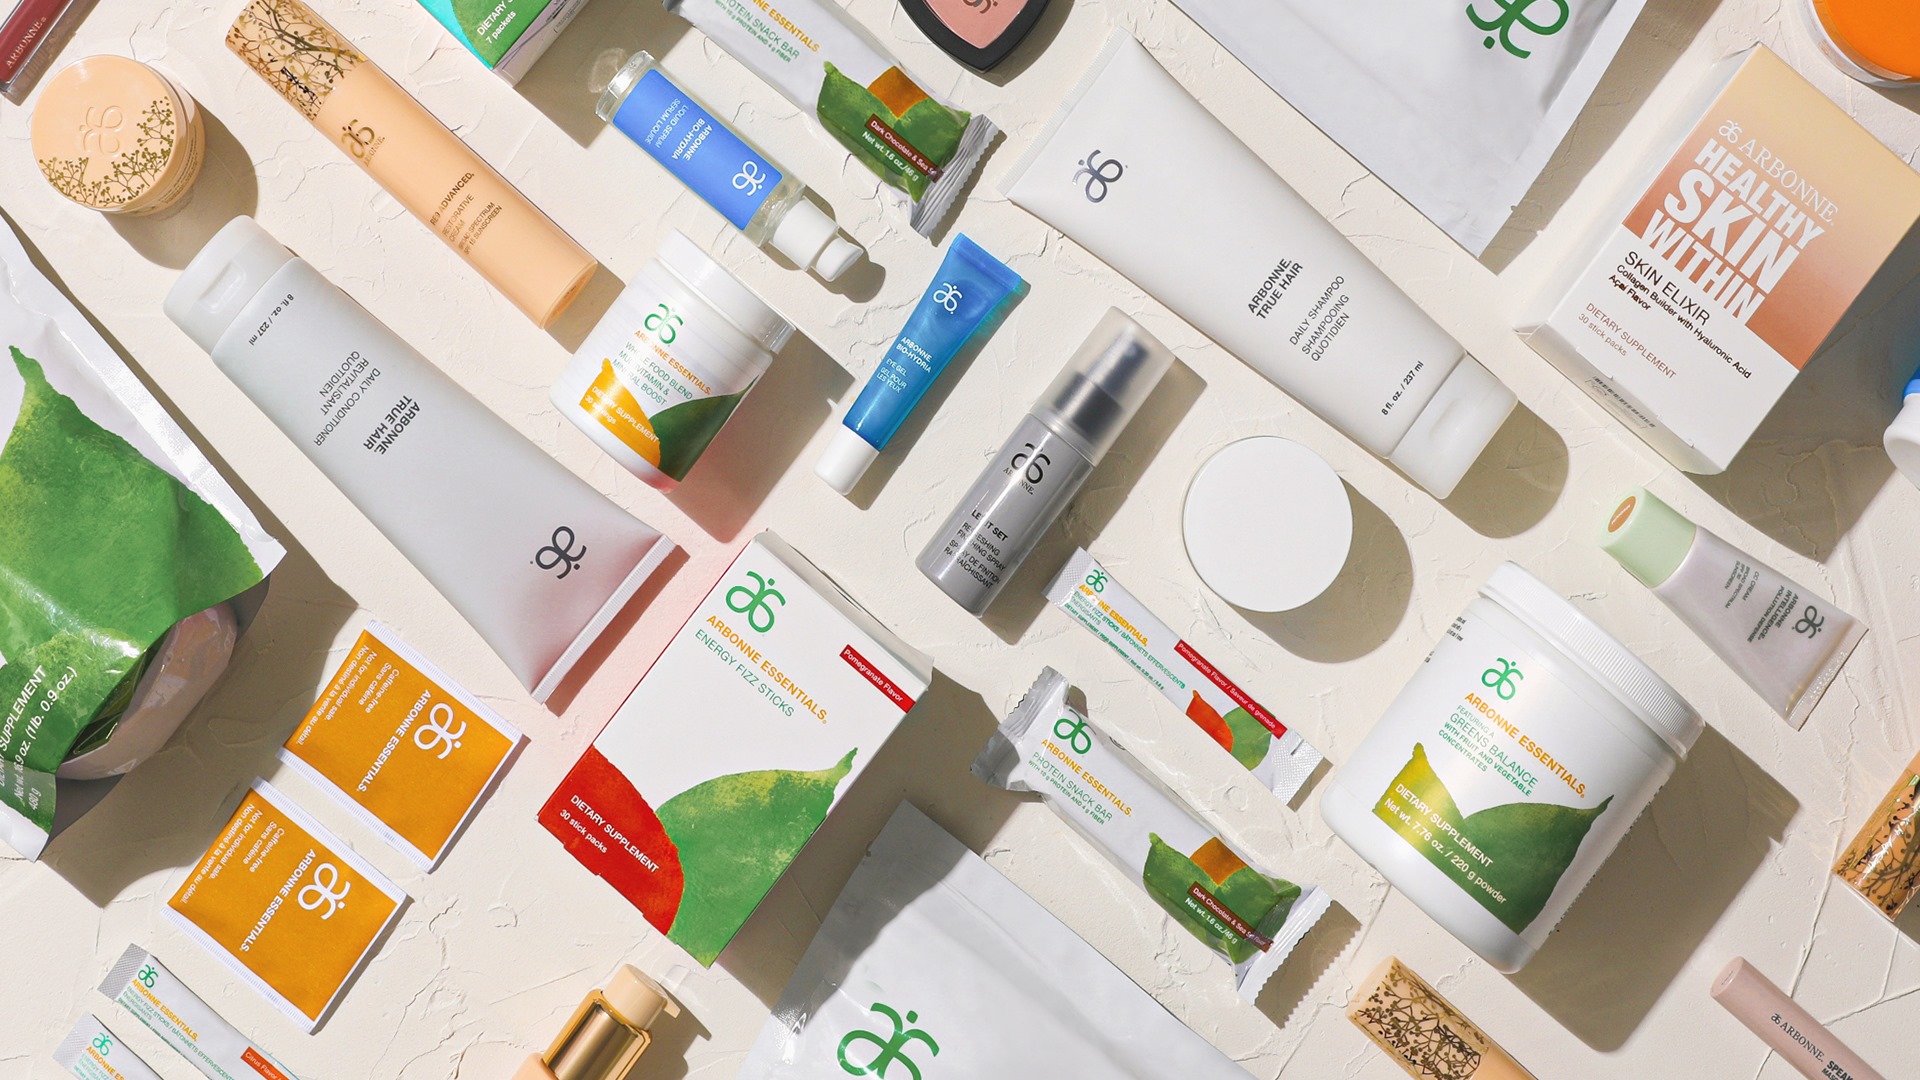 Get 20% savings when you shop at Arbonne